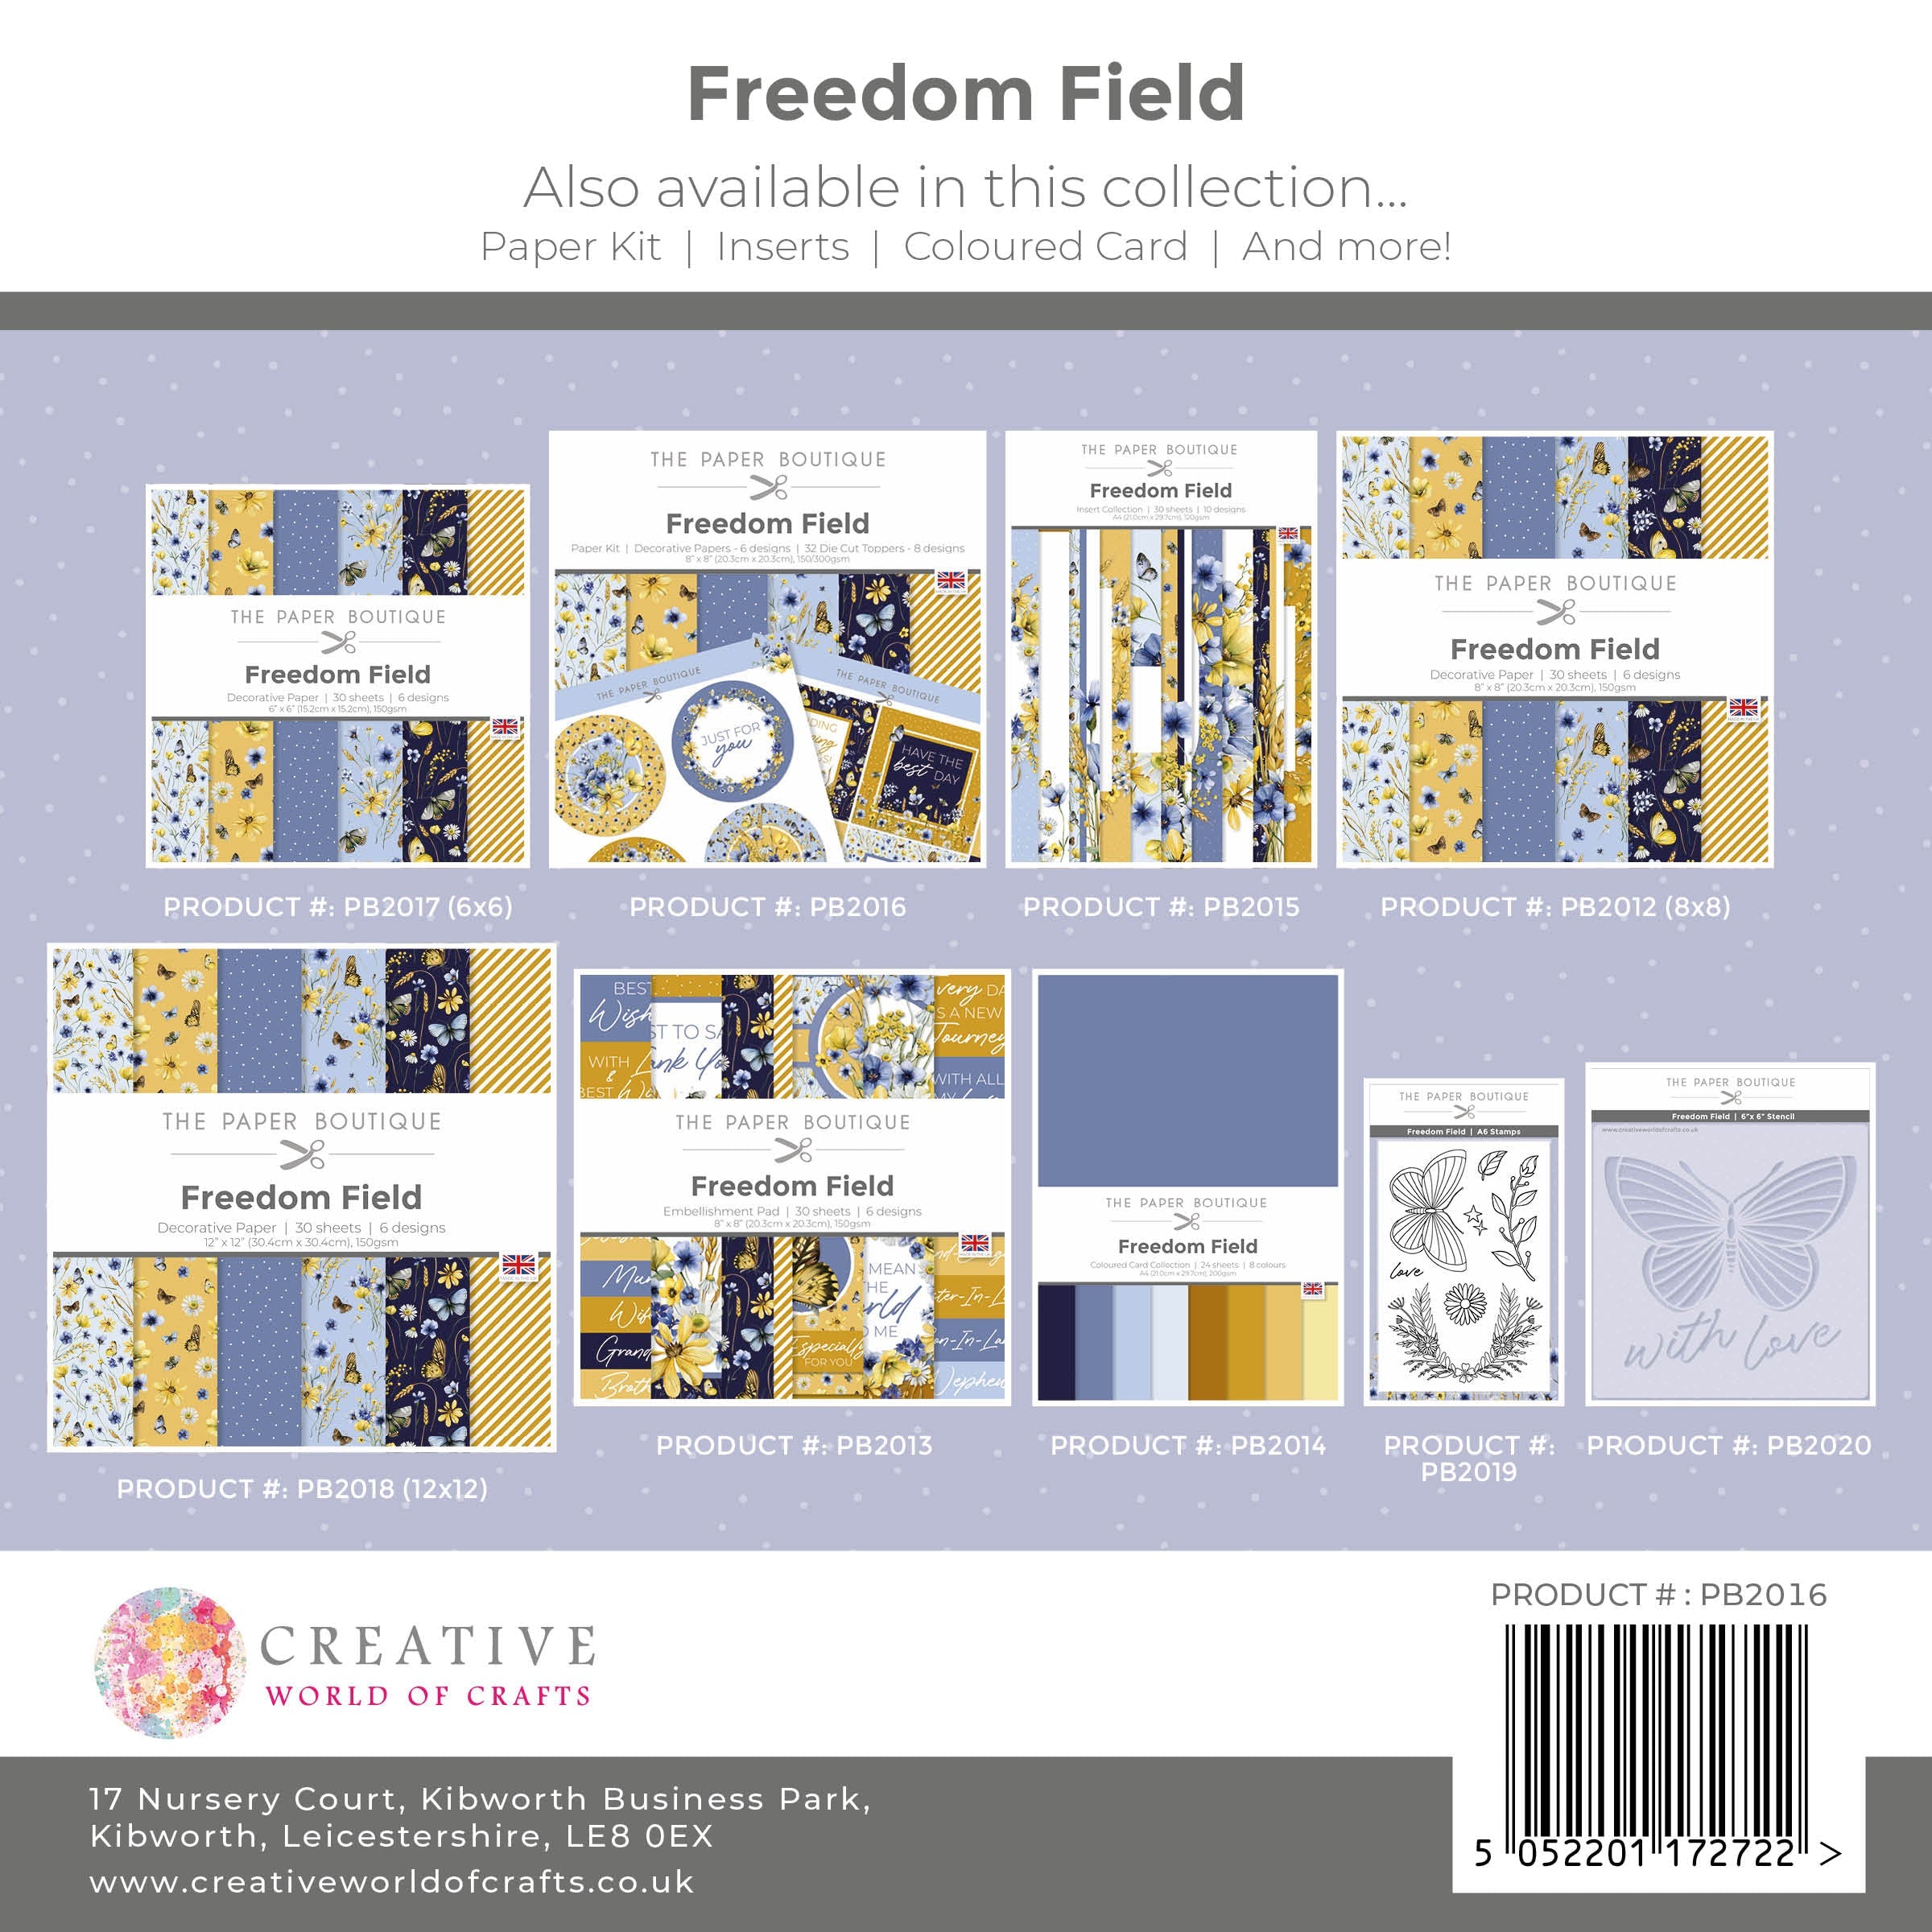 The Paper Boutique Freedom Field Paper Kit